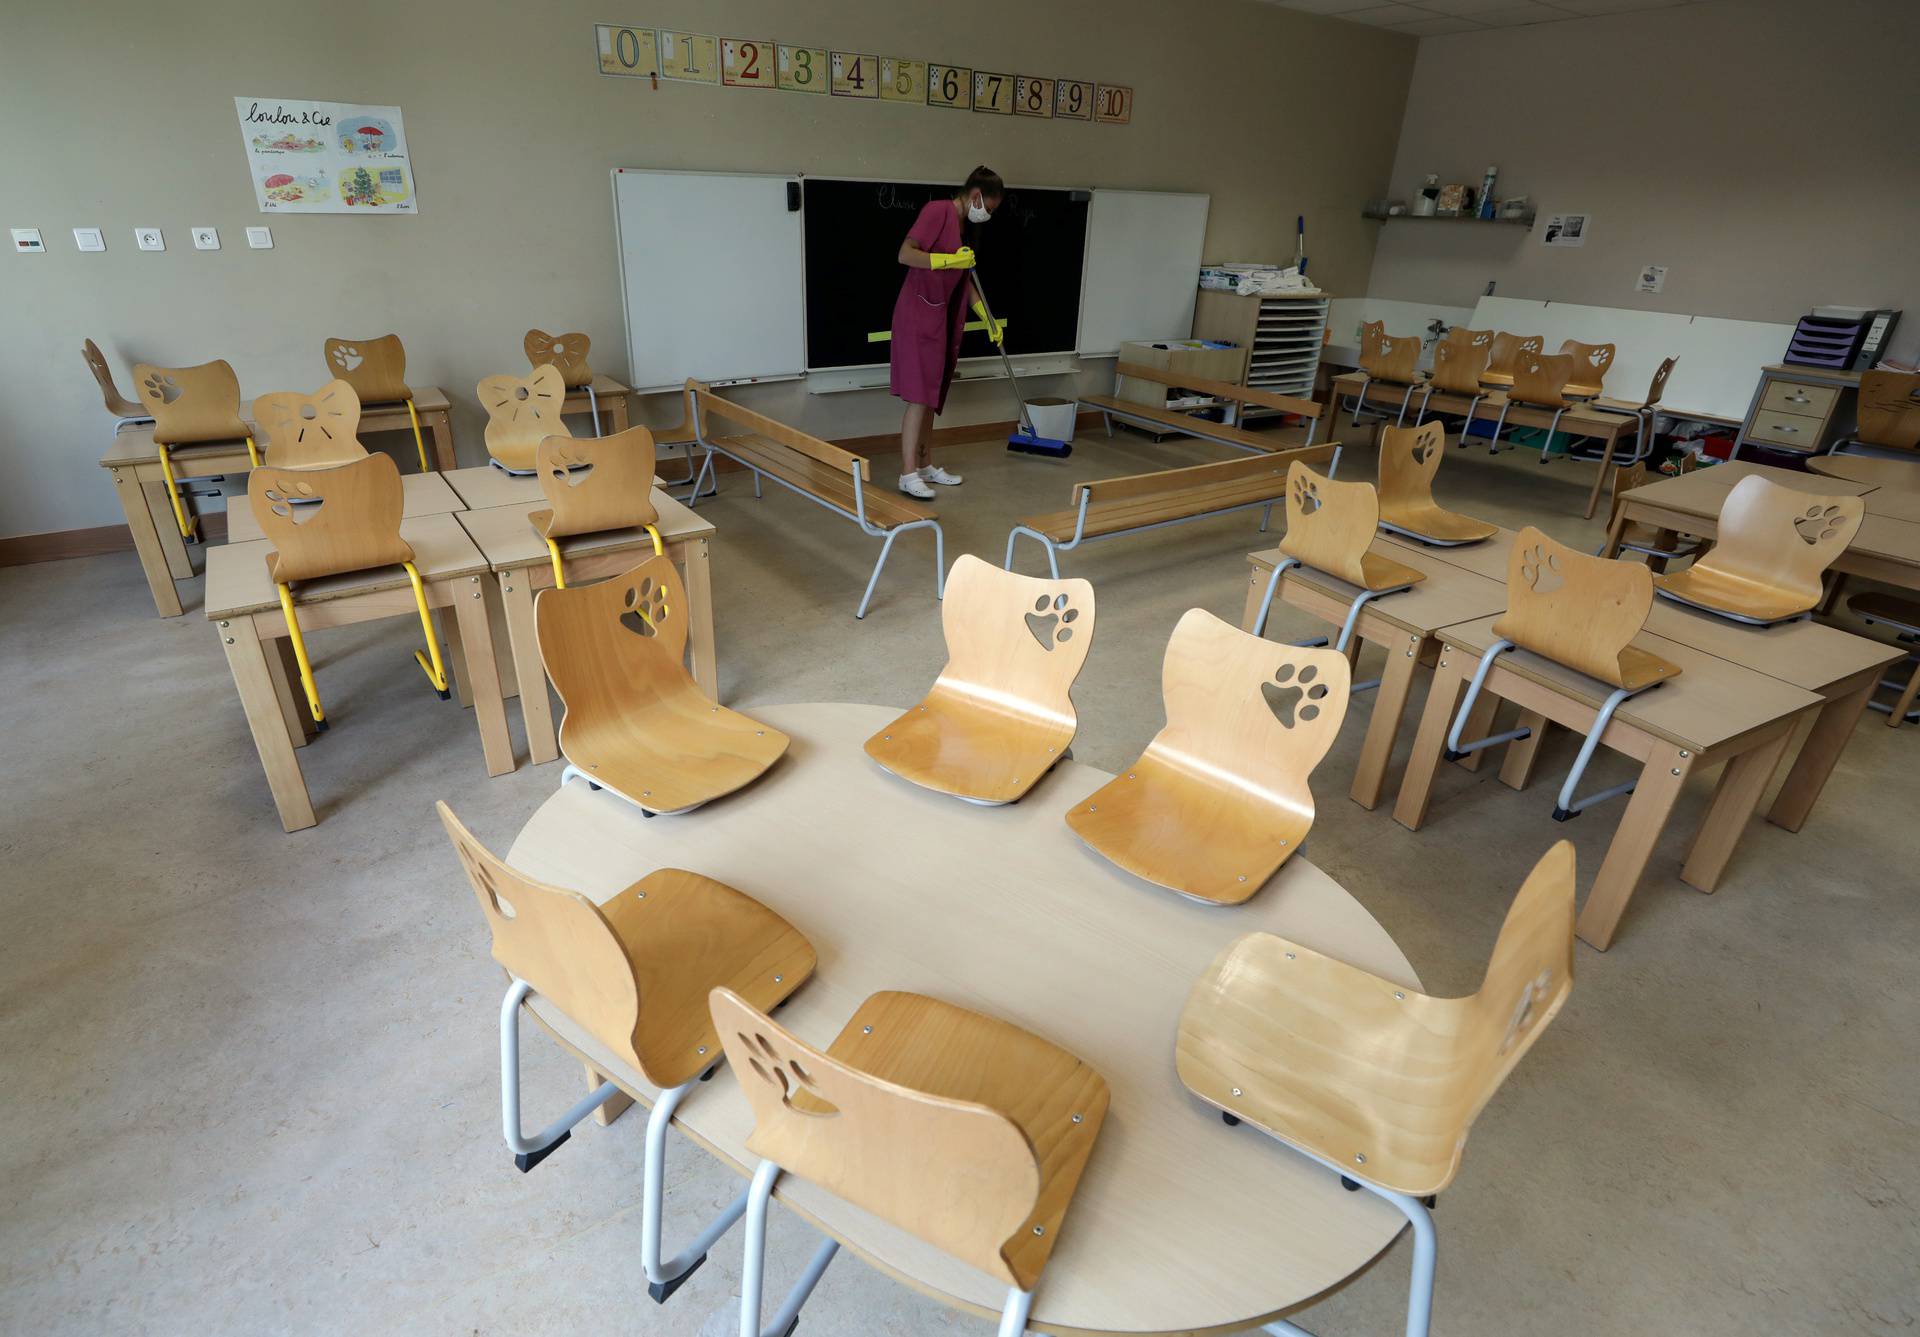 A municipal employee, wearing a protective face mask, cleans a classroom at a primary school in Le Cannet